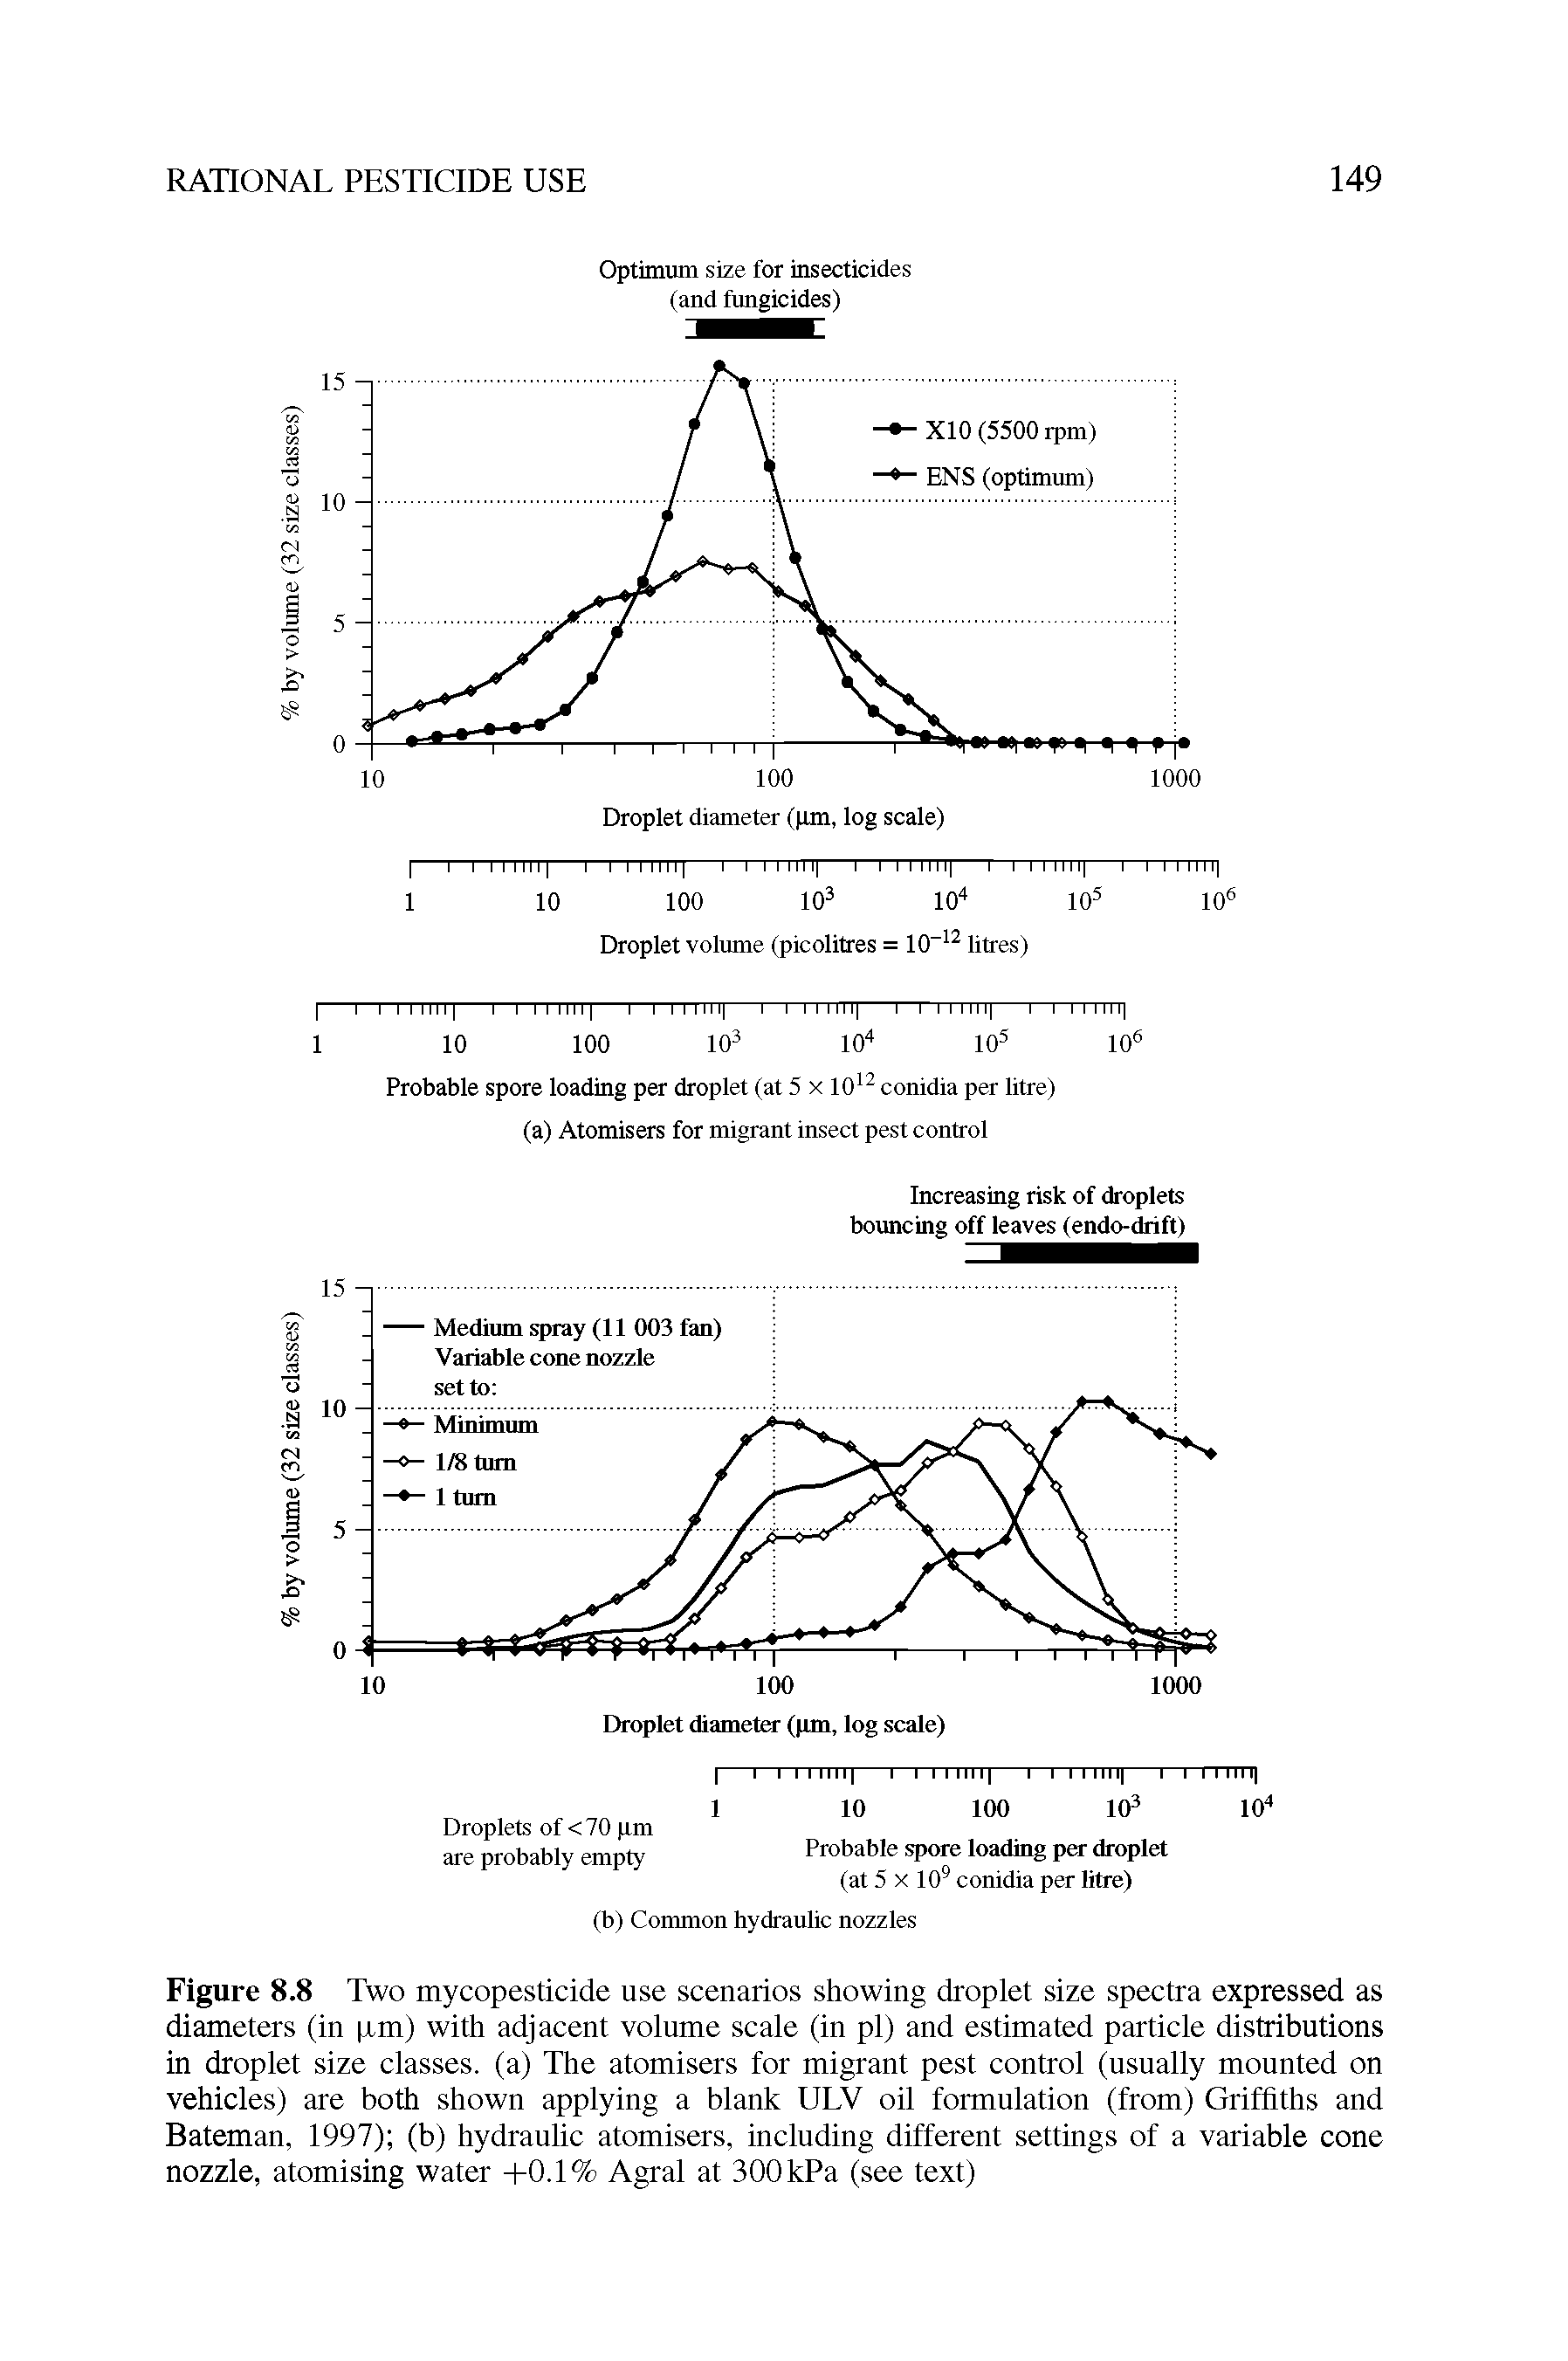 Figure 8.8 Two mycopesticide use scenarios showing droplet size spectra expressed as diameters (in p,m) with adjacent volume scale (in pi) and estimated particle distributions in droplet size classes, (a) The atomisers for migrant pest control (usually mounted on vehicles) are both shown applying a blank ULV oil formulation (from) Griffiths and Bateman, 1997) (b) hydraulic atomisers, including different settings of a variable cone nozzle, atomising water +0.1% Agral at 300 kPa (see text)...